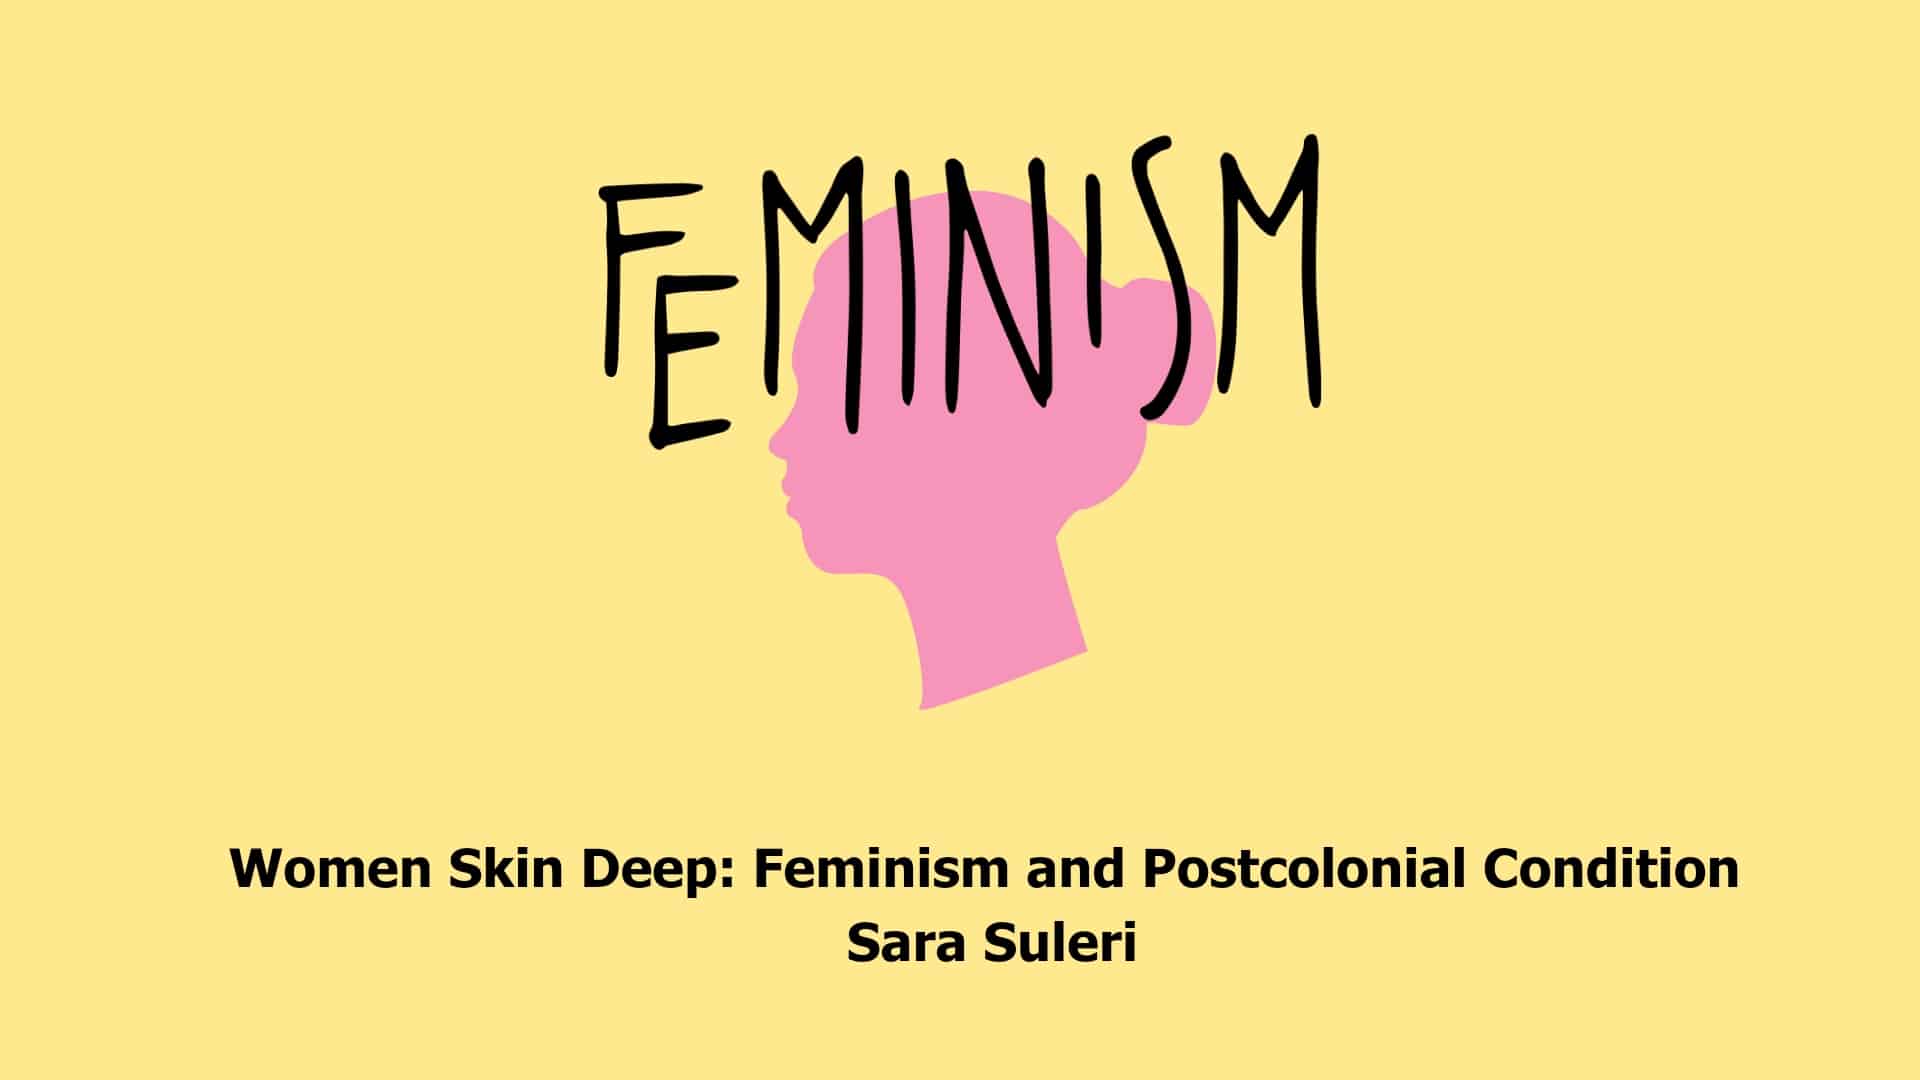 Women Skin Deep: Feminism and the Postcolonial Condition